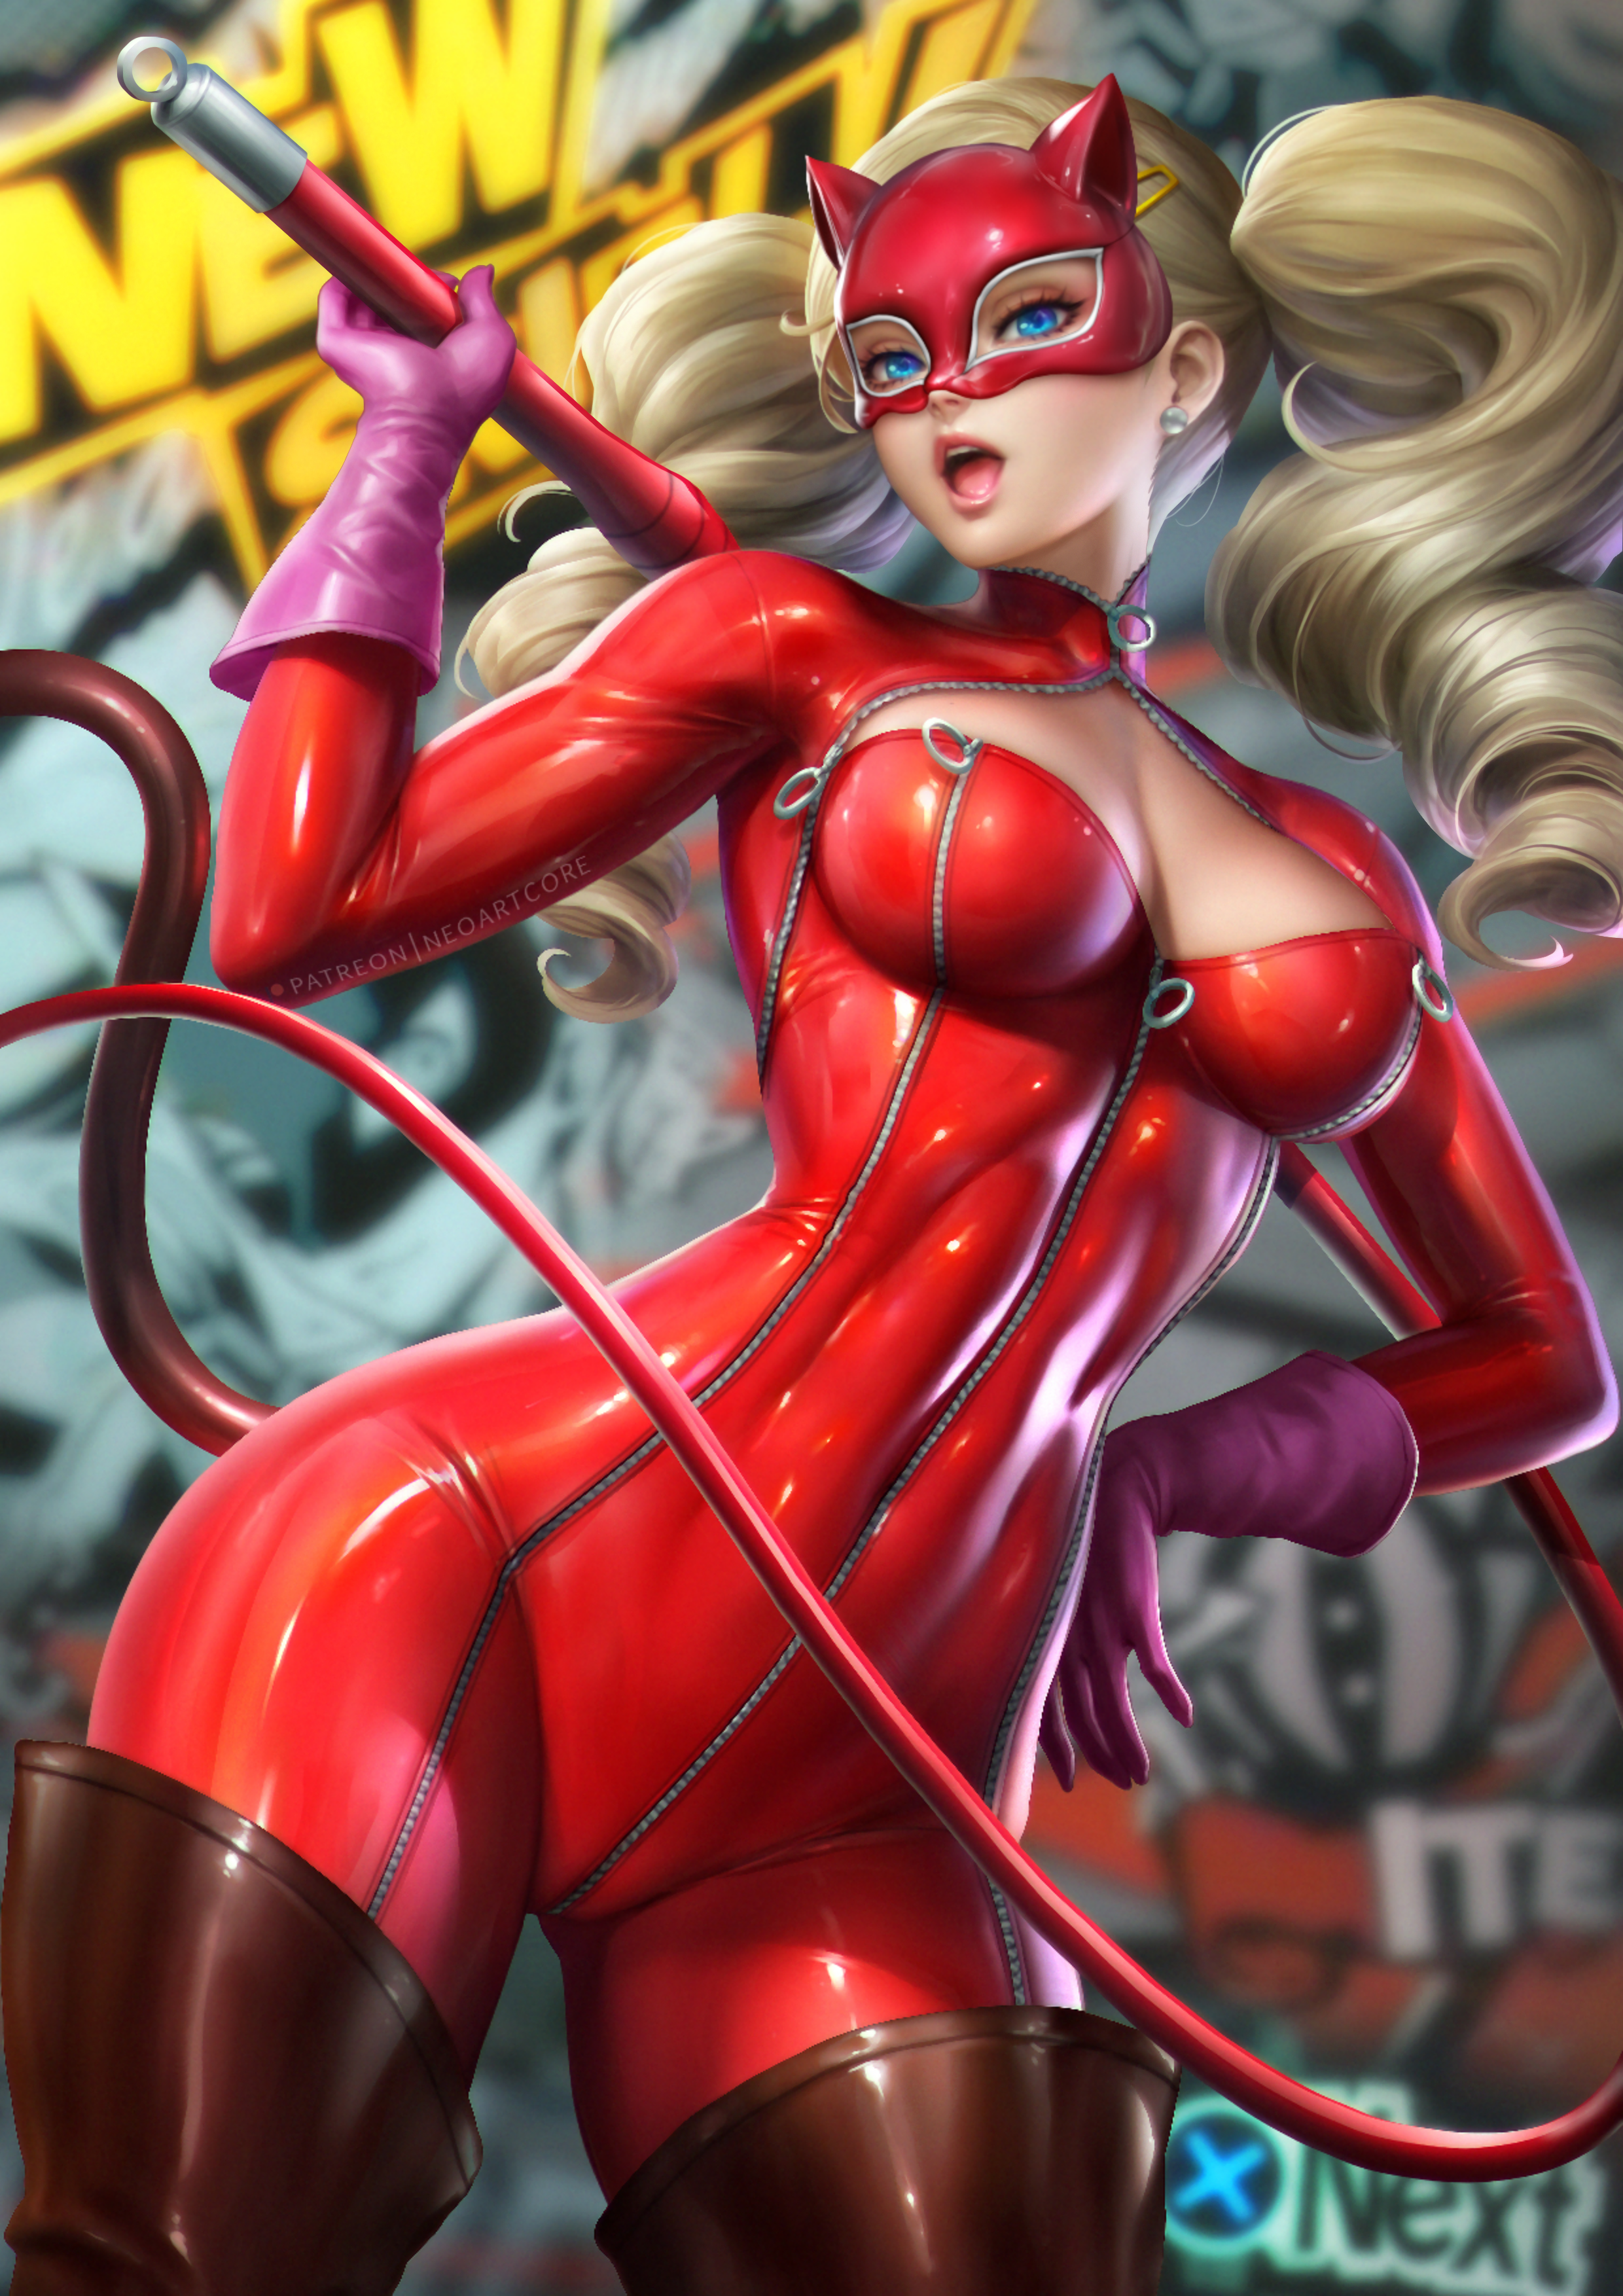 Anime 2480x3508 Ann Takamaki  NeoArtCorE (artist) big boobs thick thigh tight clothing catsuit Persona 5 blue eyes blonde mask whips thighboots cleavage cleavage cutout looking at viewer anime girls portrait display